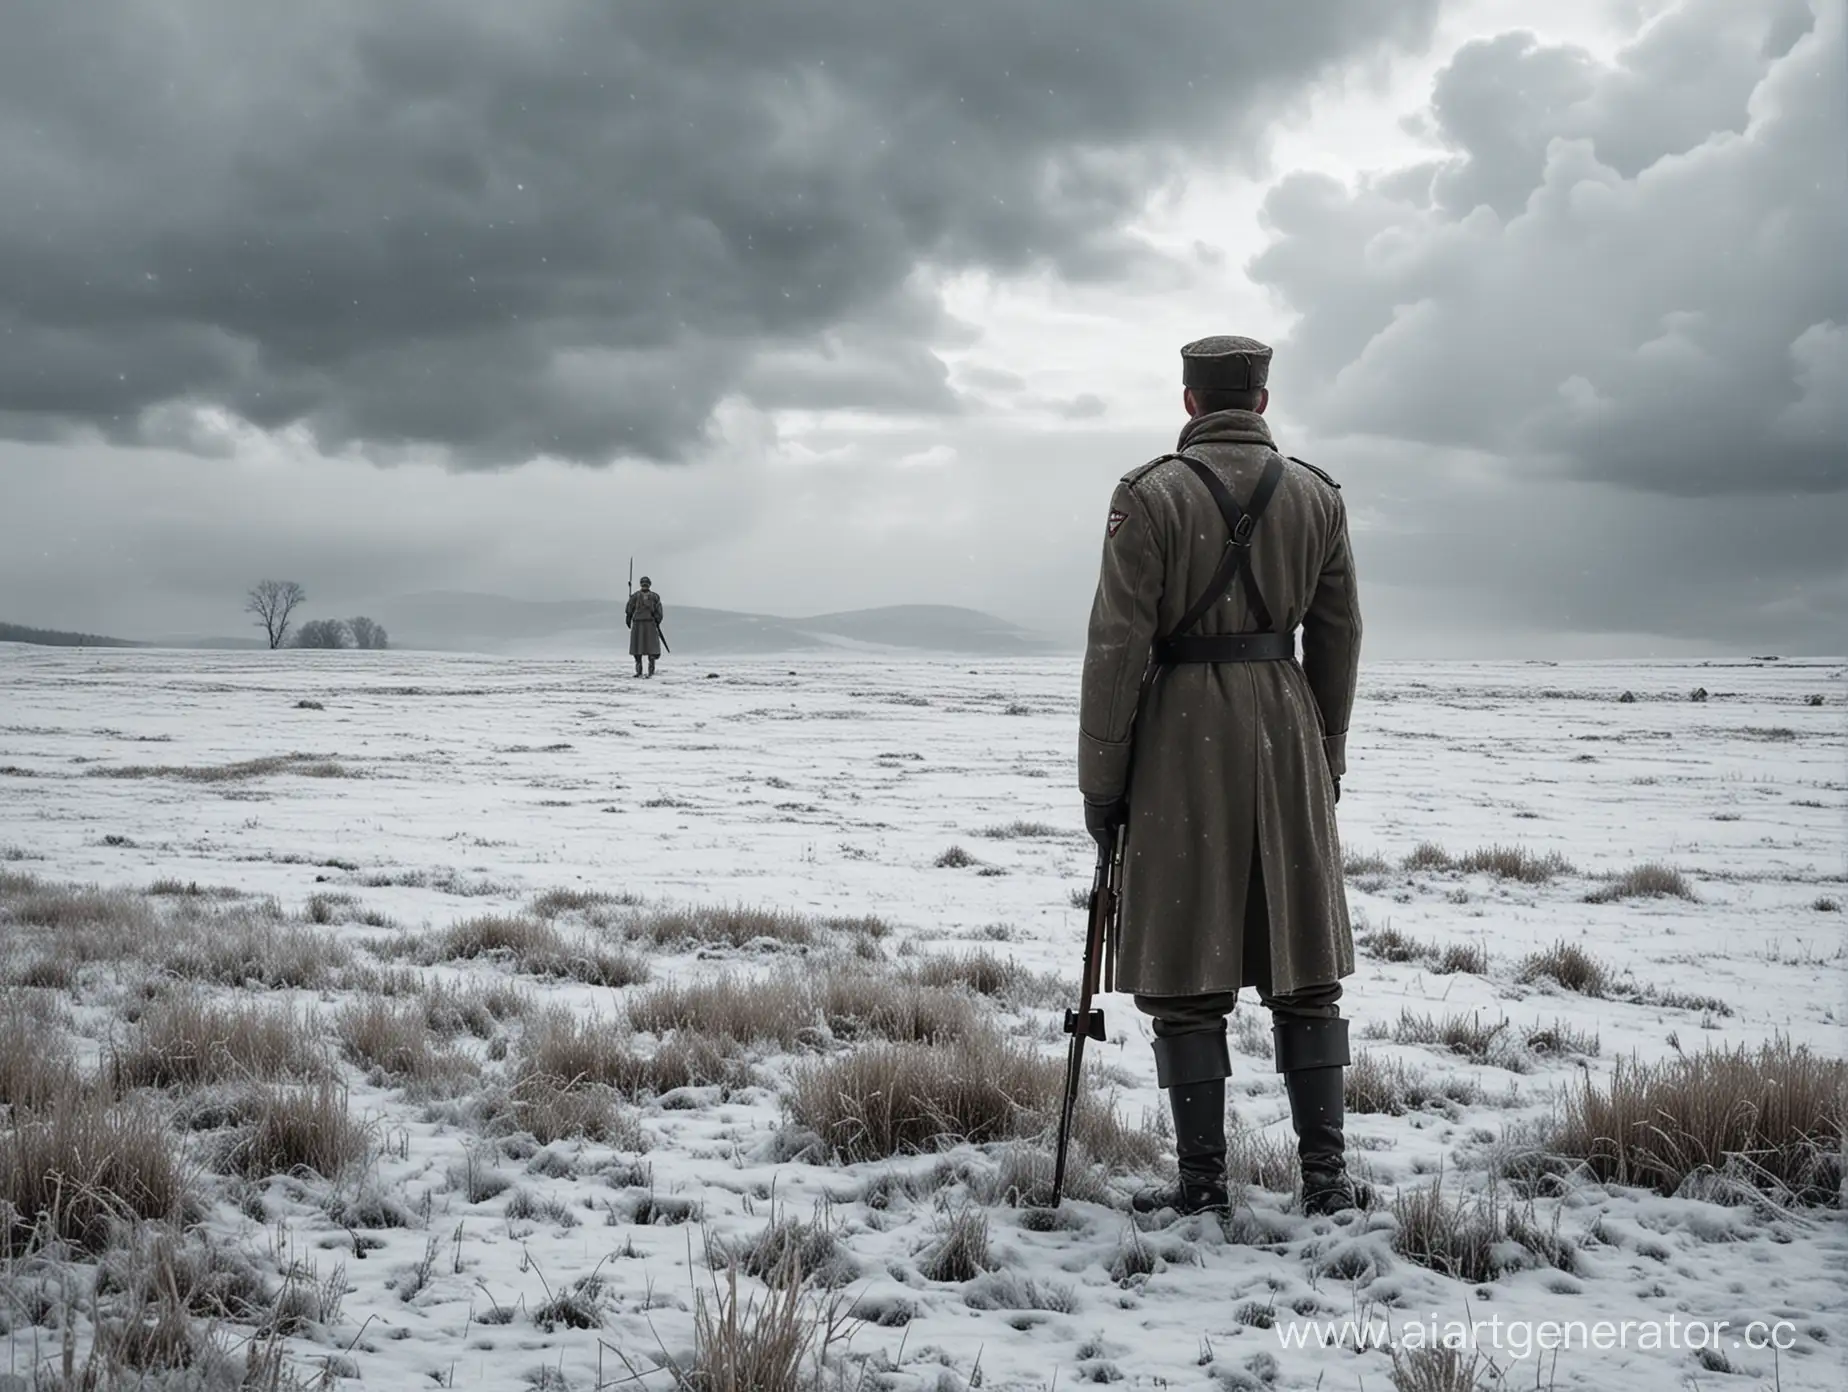 Create an image depicting a frozen soldier against the backdrop of a snowy field. A heavy cloud hangs over the scene, and in the distance, a figure reminiscent of the lonely remaining Hitler can be seen, whose last hope faded in the cold snow.